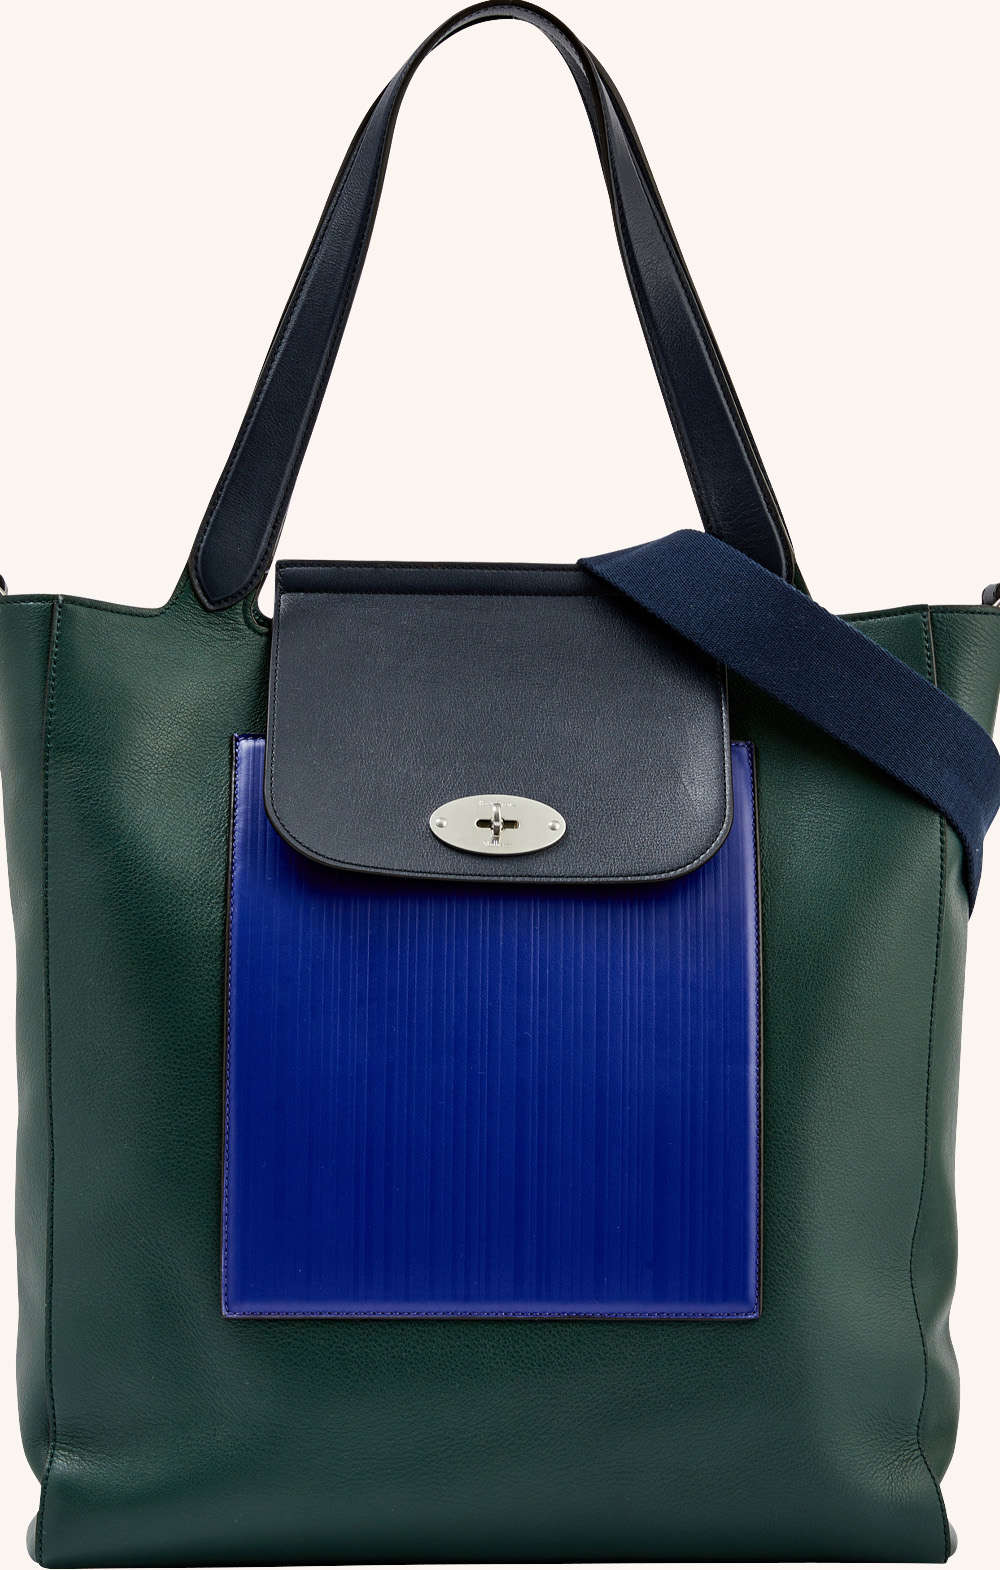 Paul Smith leather tote